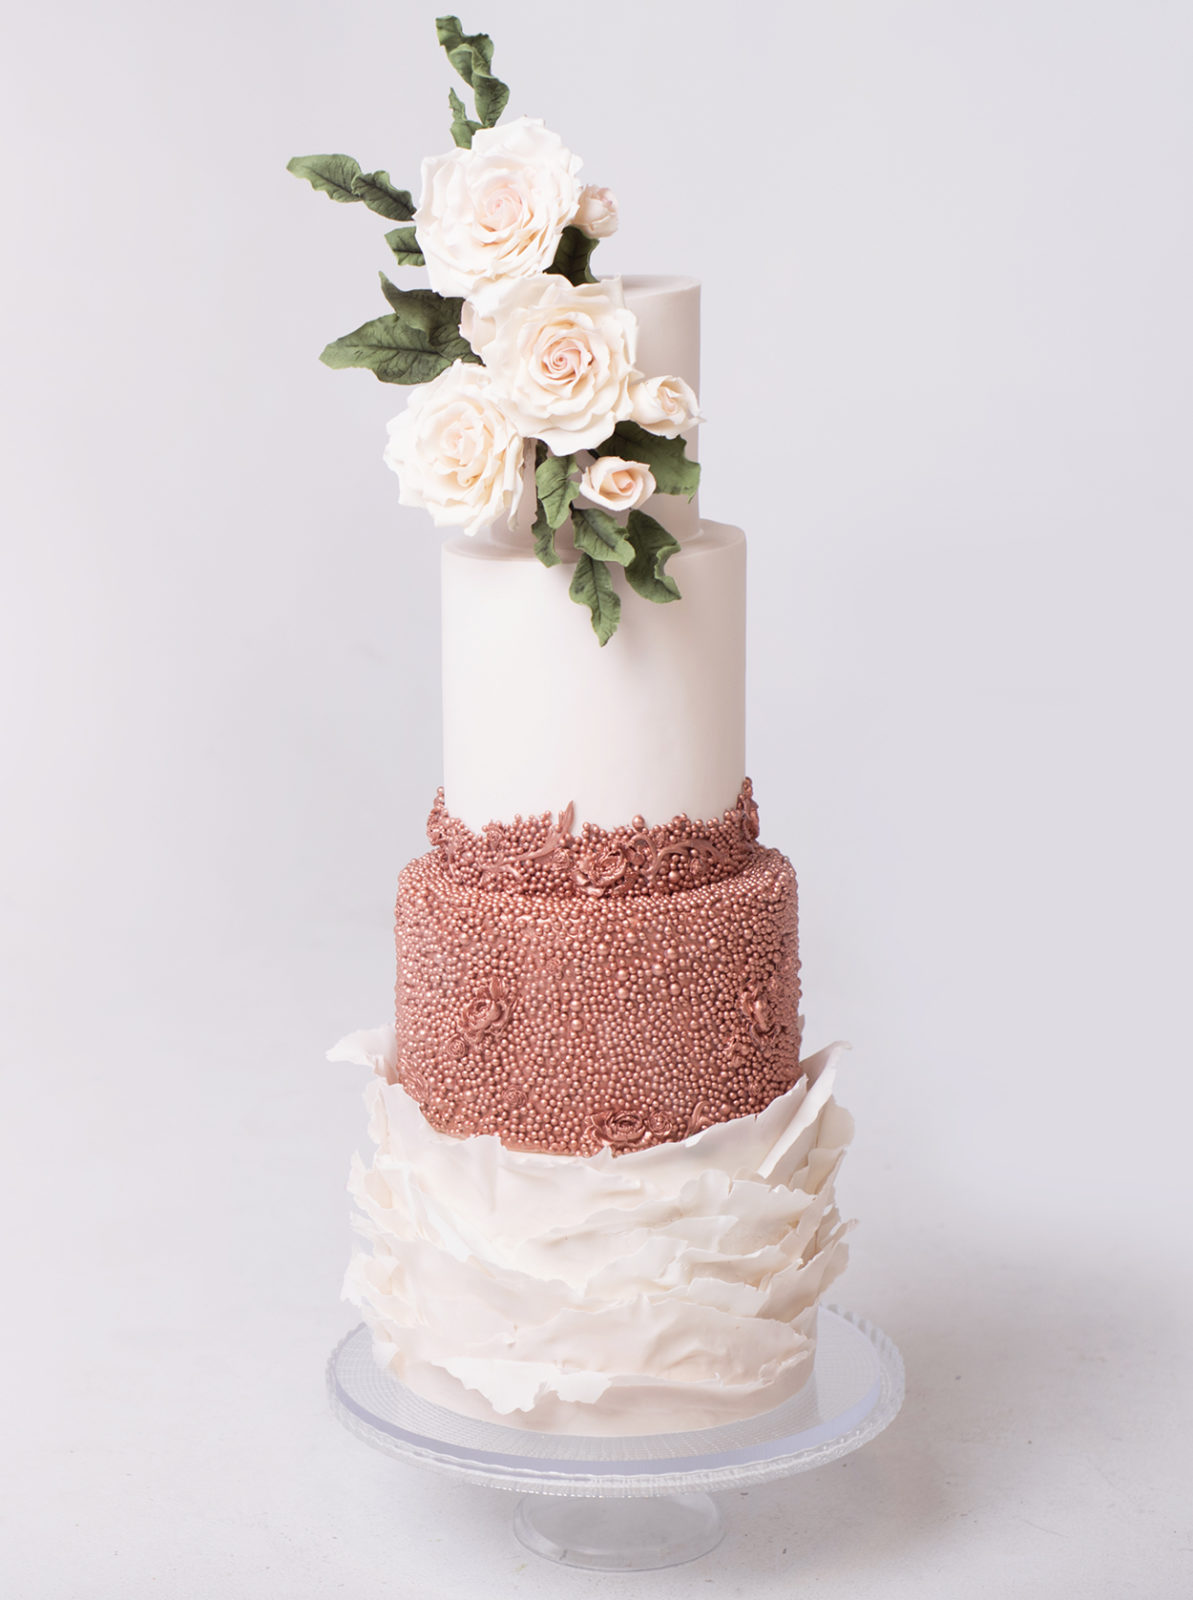 Sparkling metallic details on this show-stopping three tiered textured wedding cake